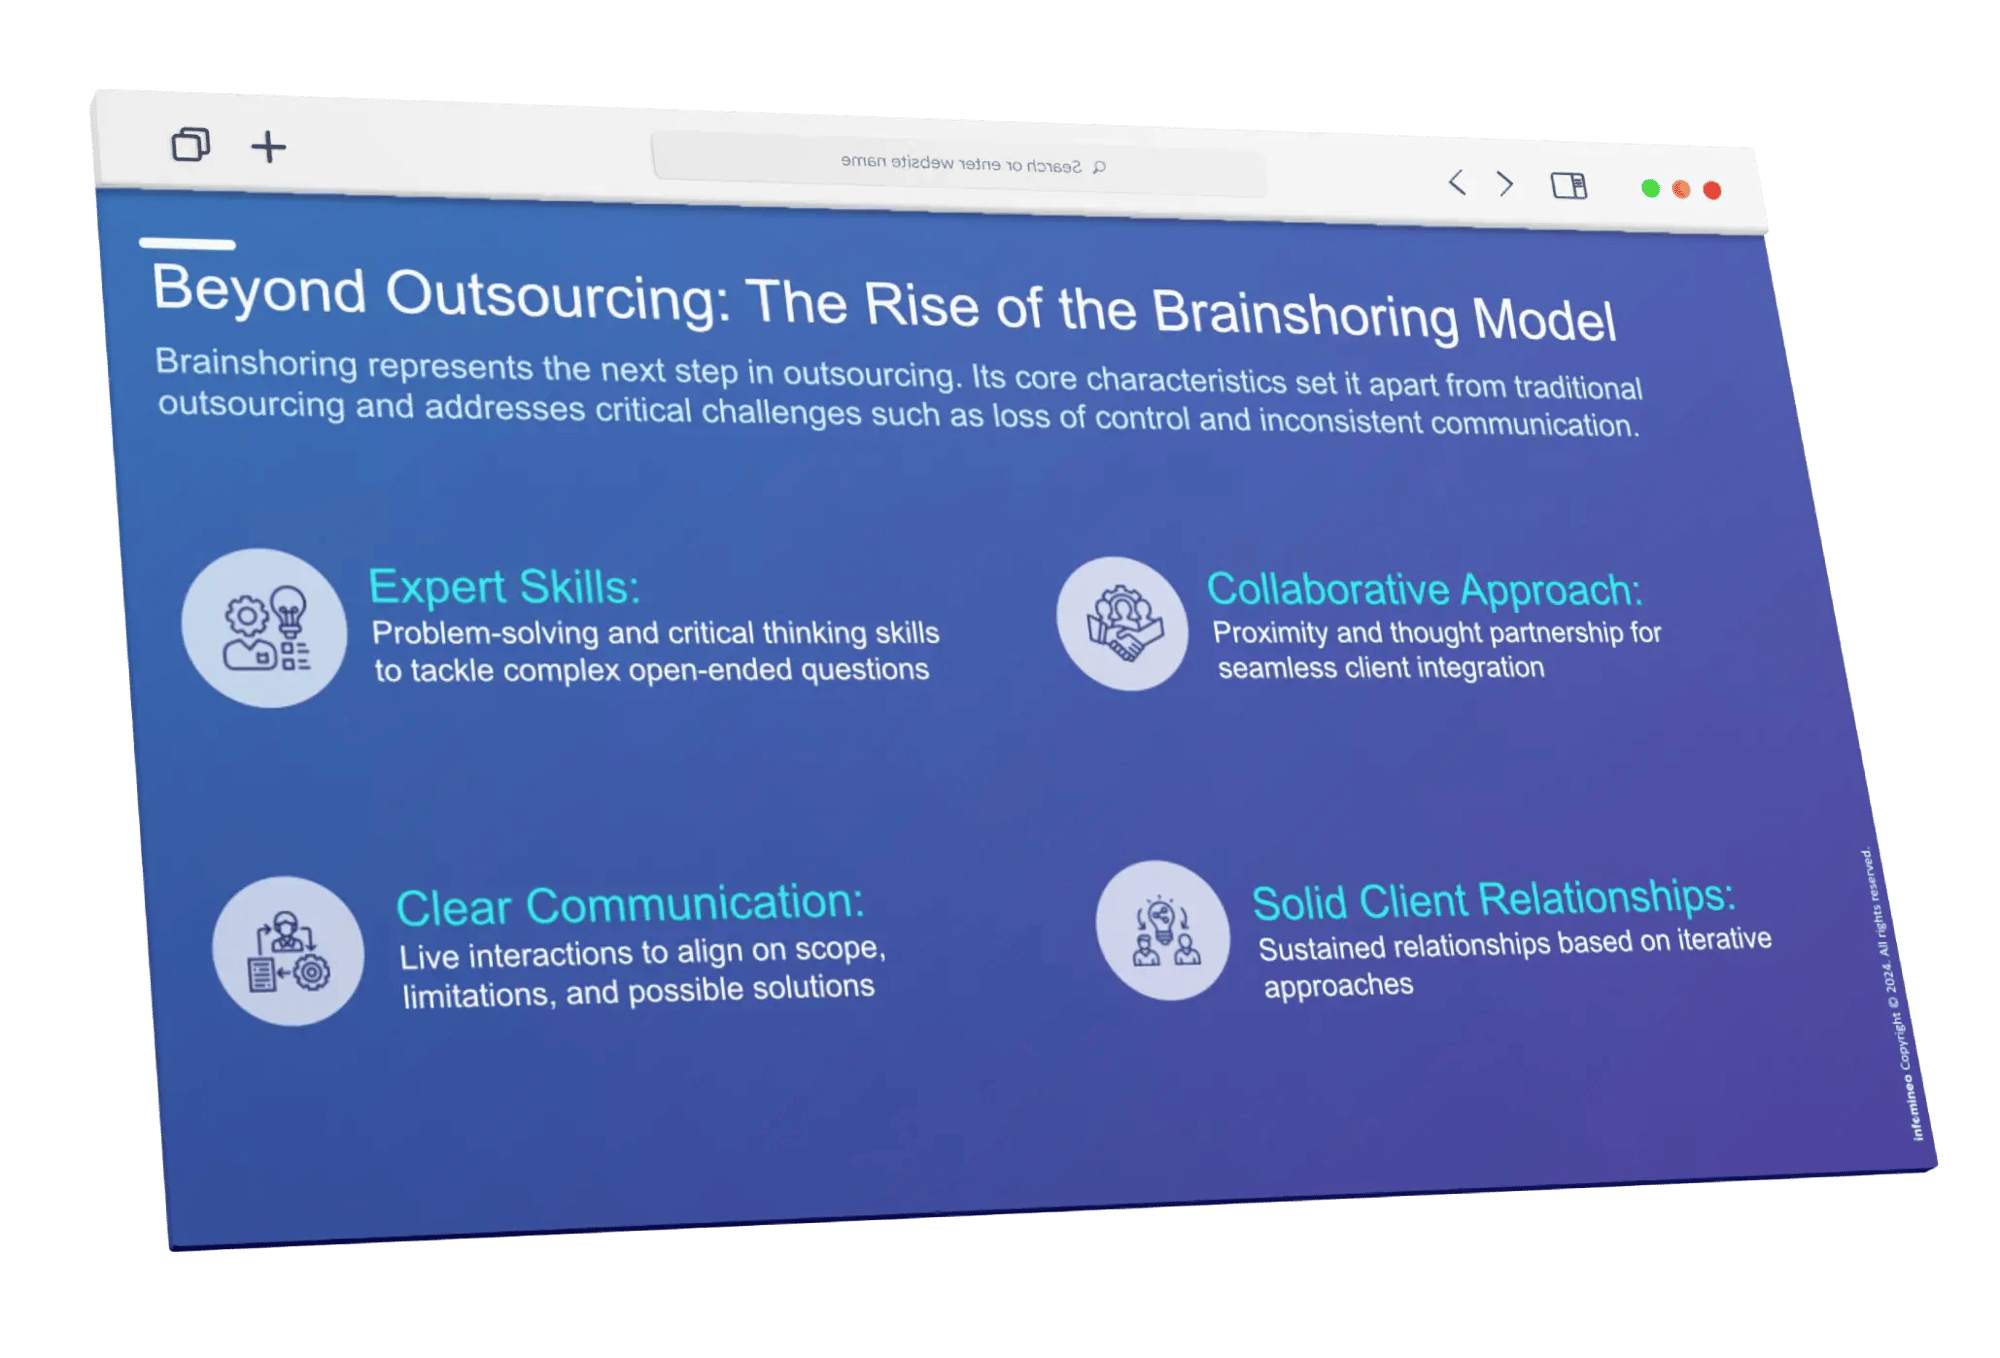 Beyond Outsourcing: The Rise of the Brainshoring Model